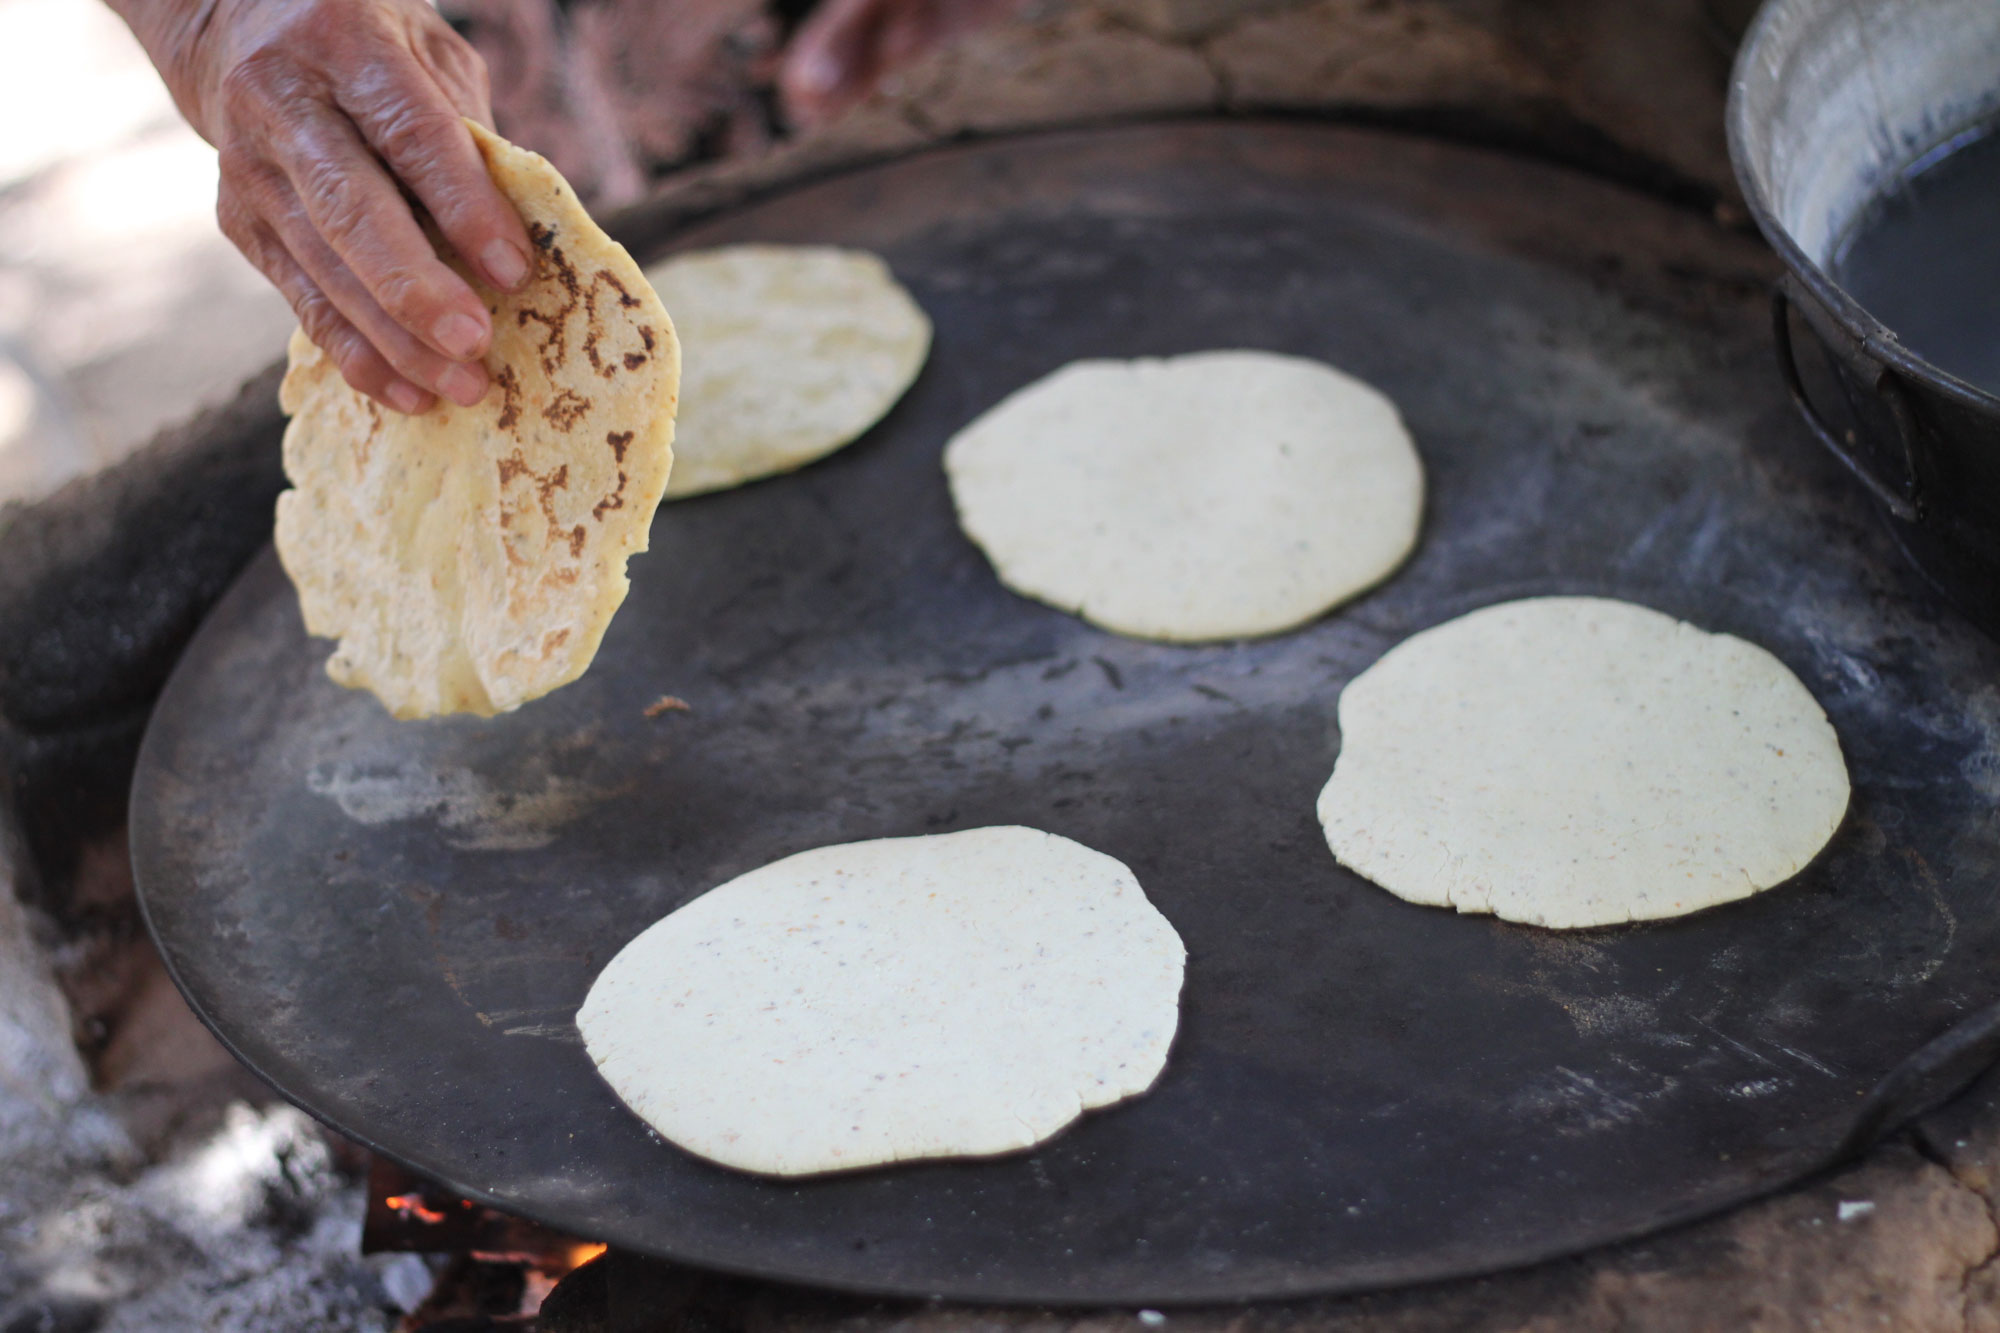 Photograph of tortillas being prepared. The photo shows a flat grill sitting on a fire, with five tortillas sitting on the grill. A person is picking up one of the tortillas, which has been slightly browned on the visible side.